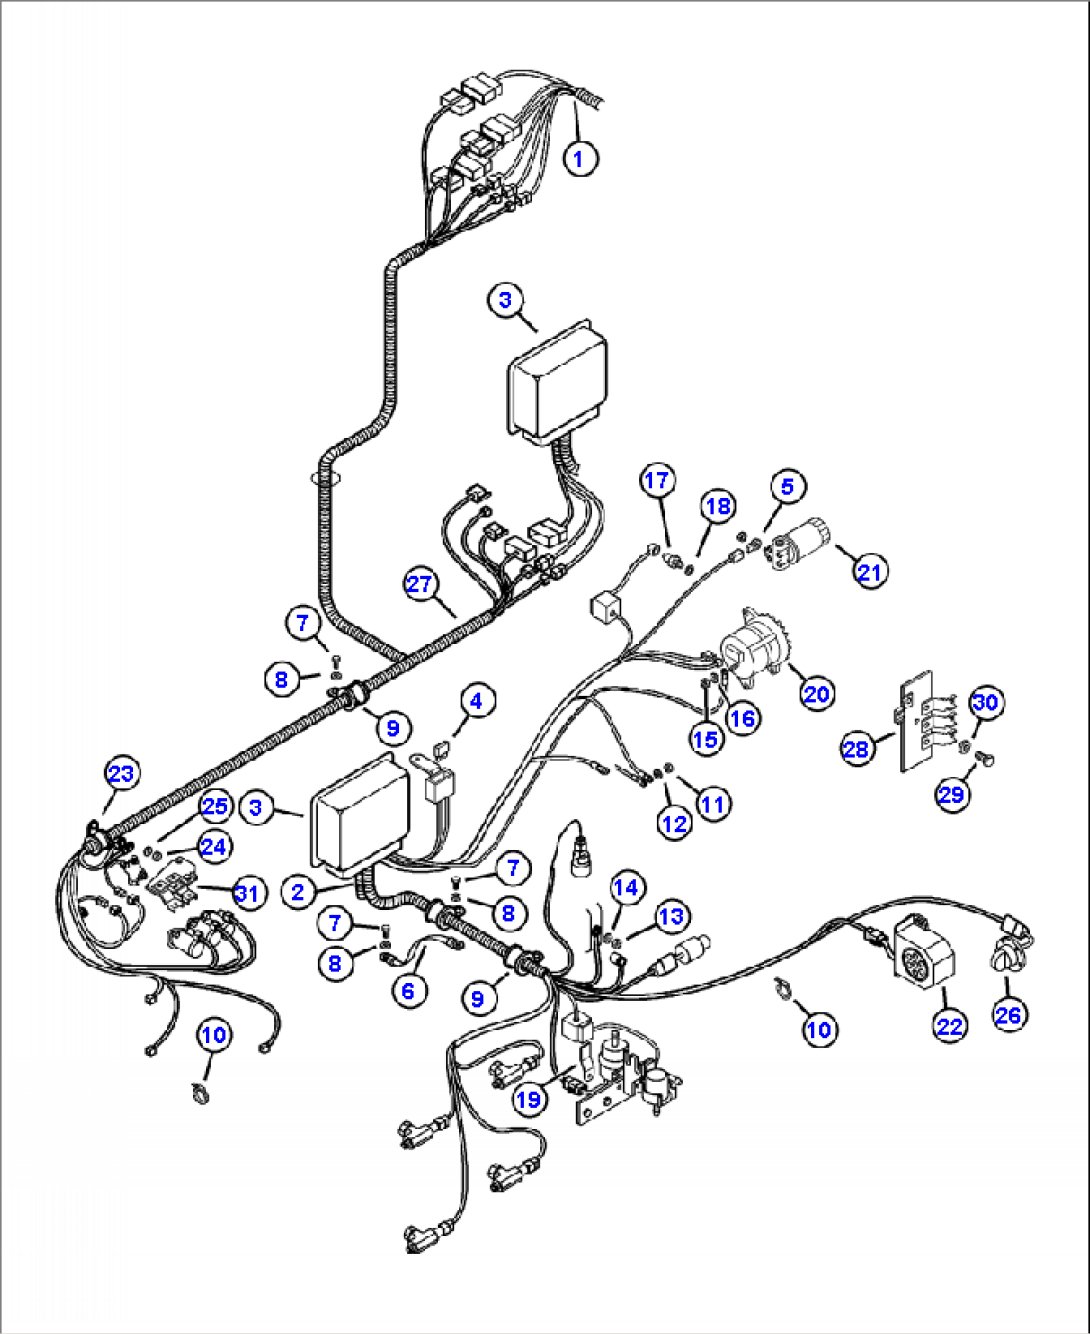 E2510-01A1 ELECTRICAL SYSTEM FRAME WIRING